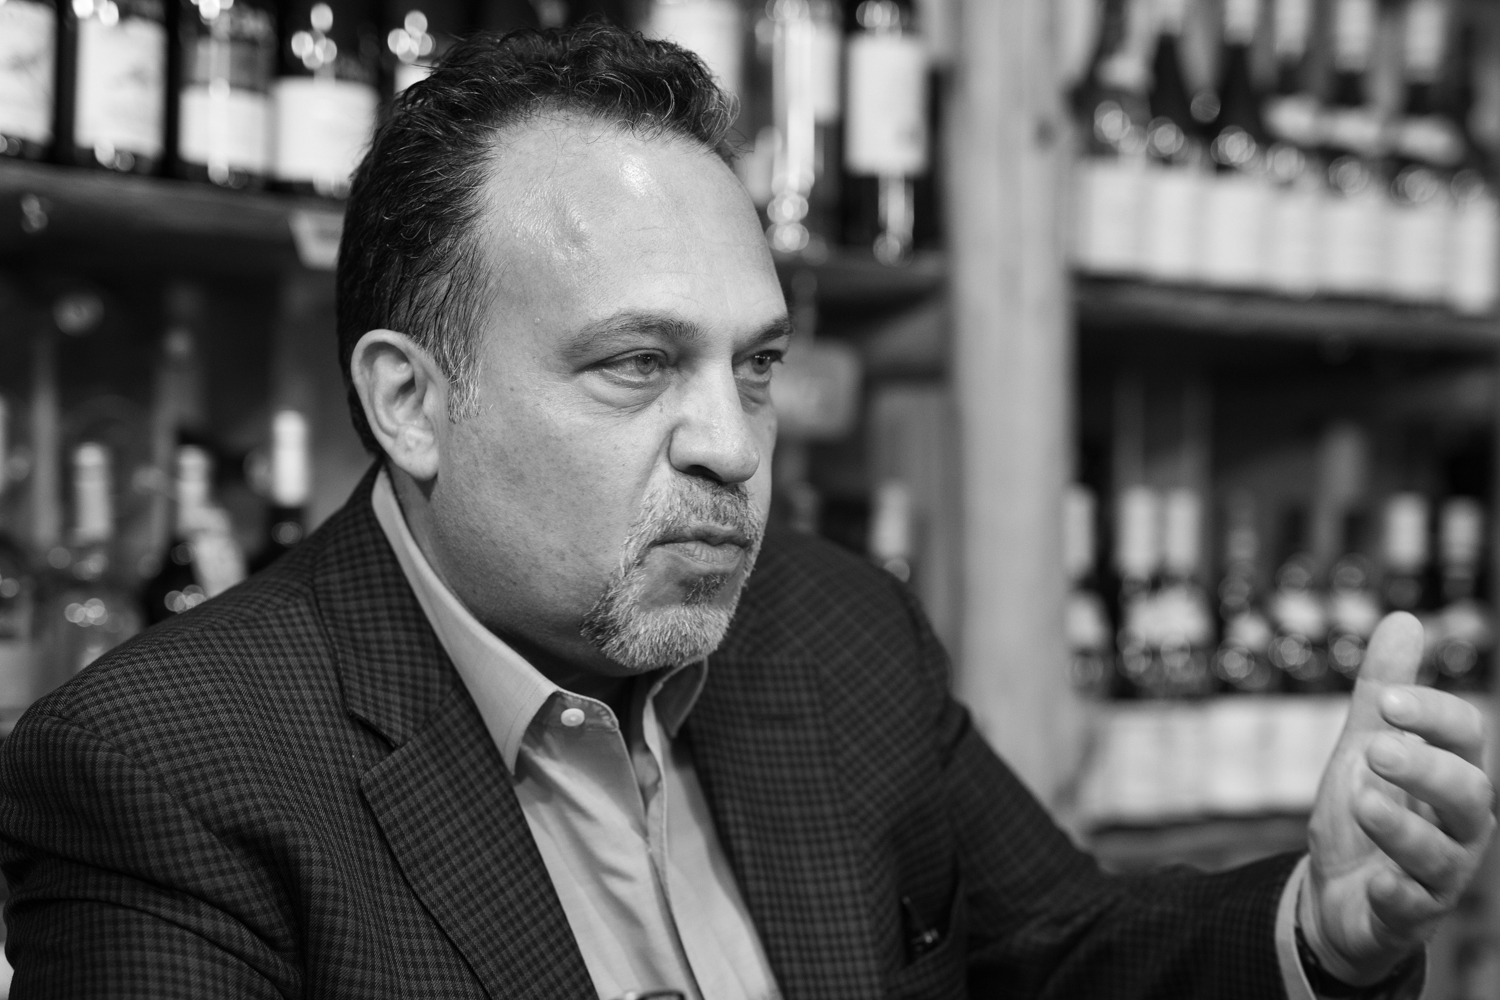 Yacoubian and Hobbs: “Our main ambition is to open up Armenia through wine”